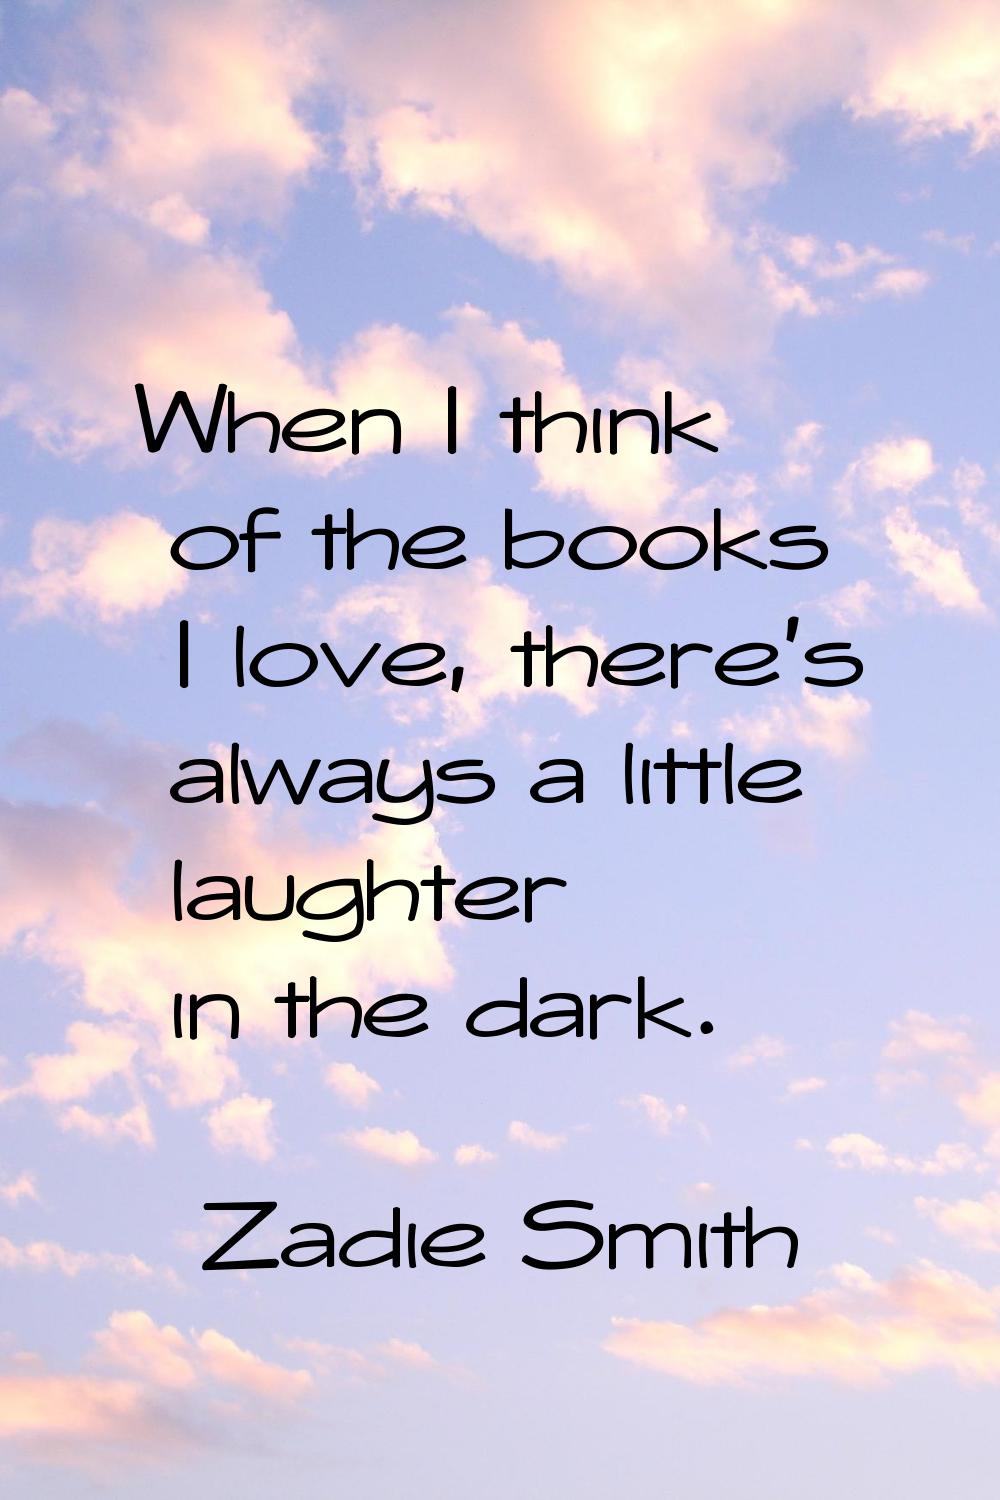 When I think of the books I love, there's always a little laughter in the dark.